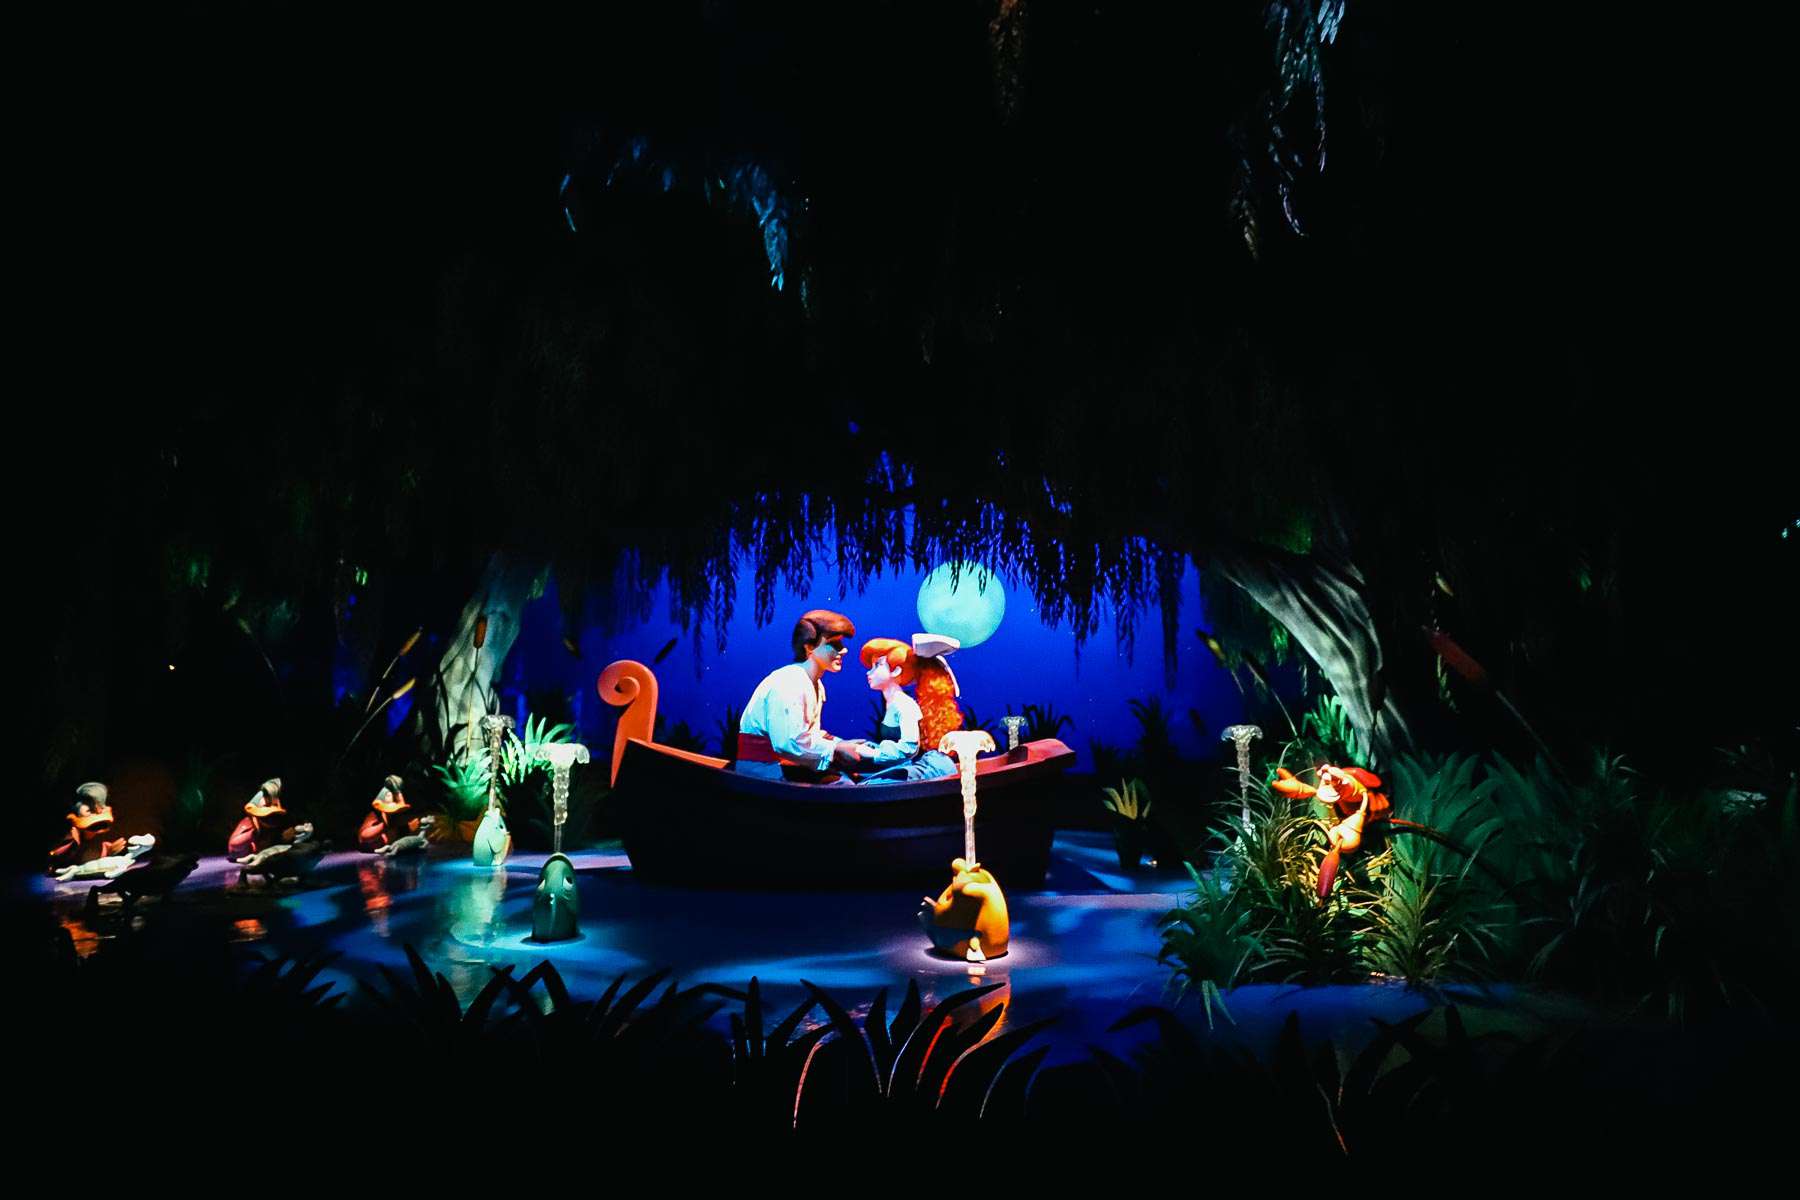 The 'Kiss the Girl' scene during the Journey of the Little Mermaid ride at Magic Kingdom. 